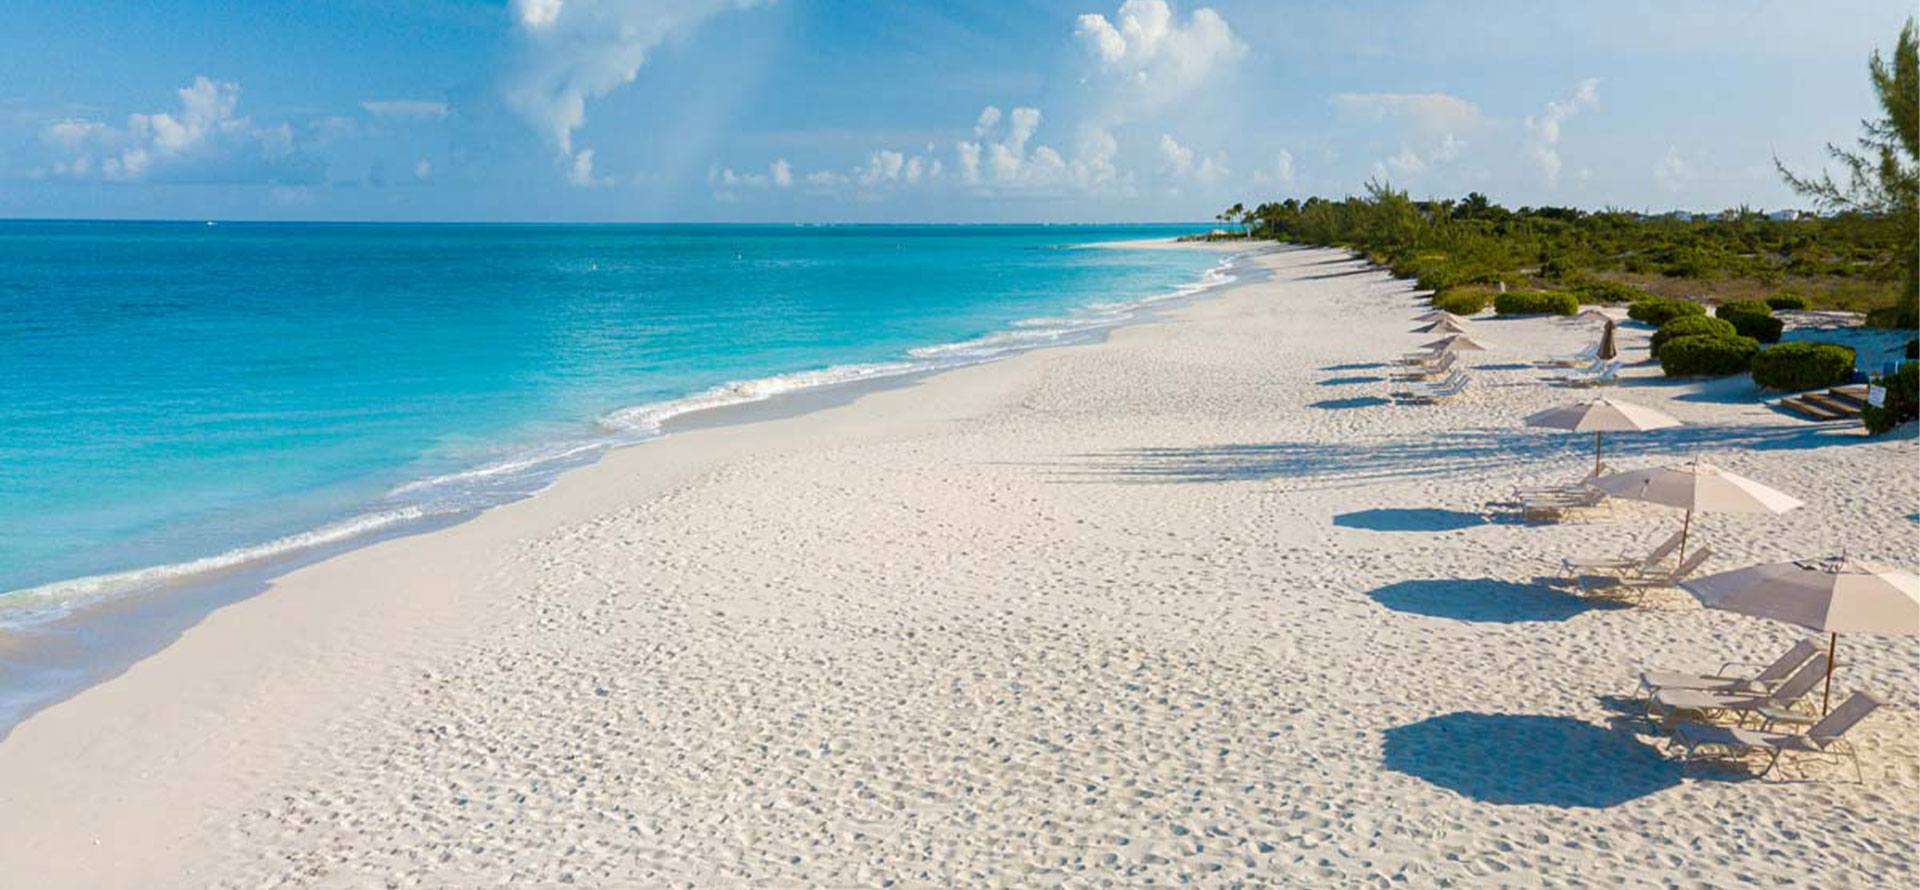 Turks and caicos beautiful beach at the best time to go.